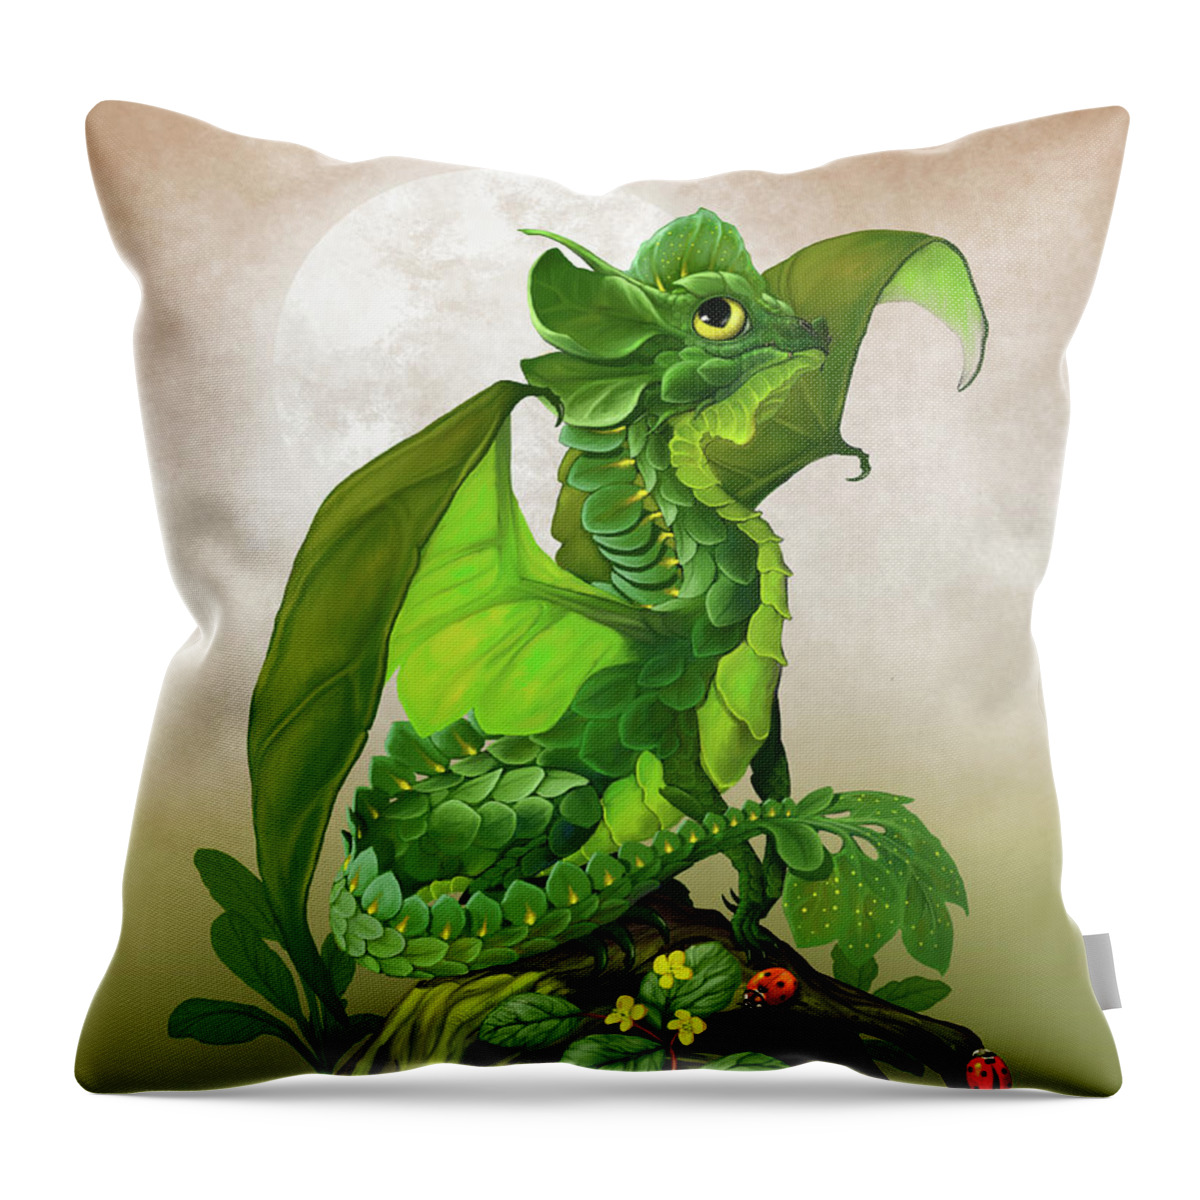 Spinach Throw Pillow featuring the digital art Spinach Dragon by Stanley Morrison